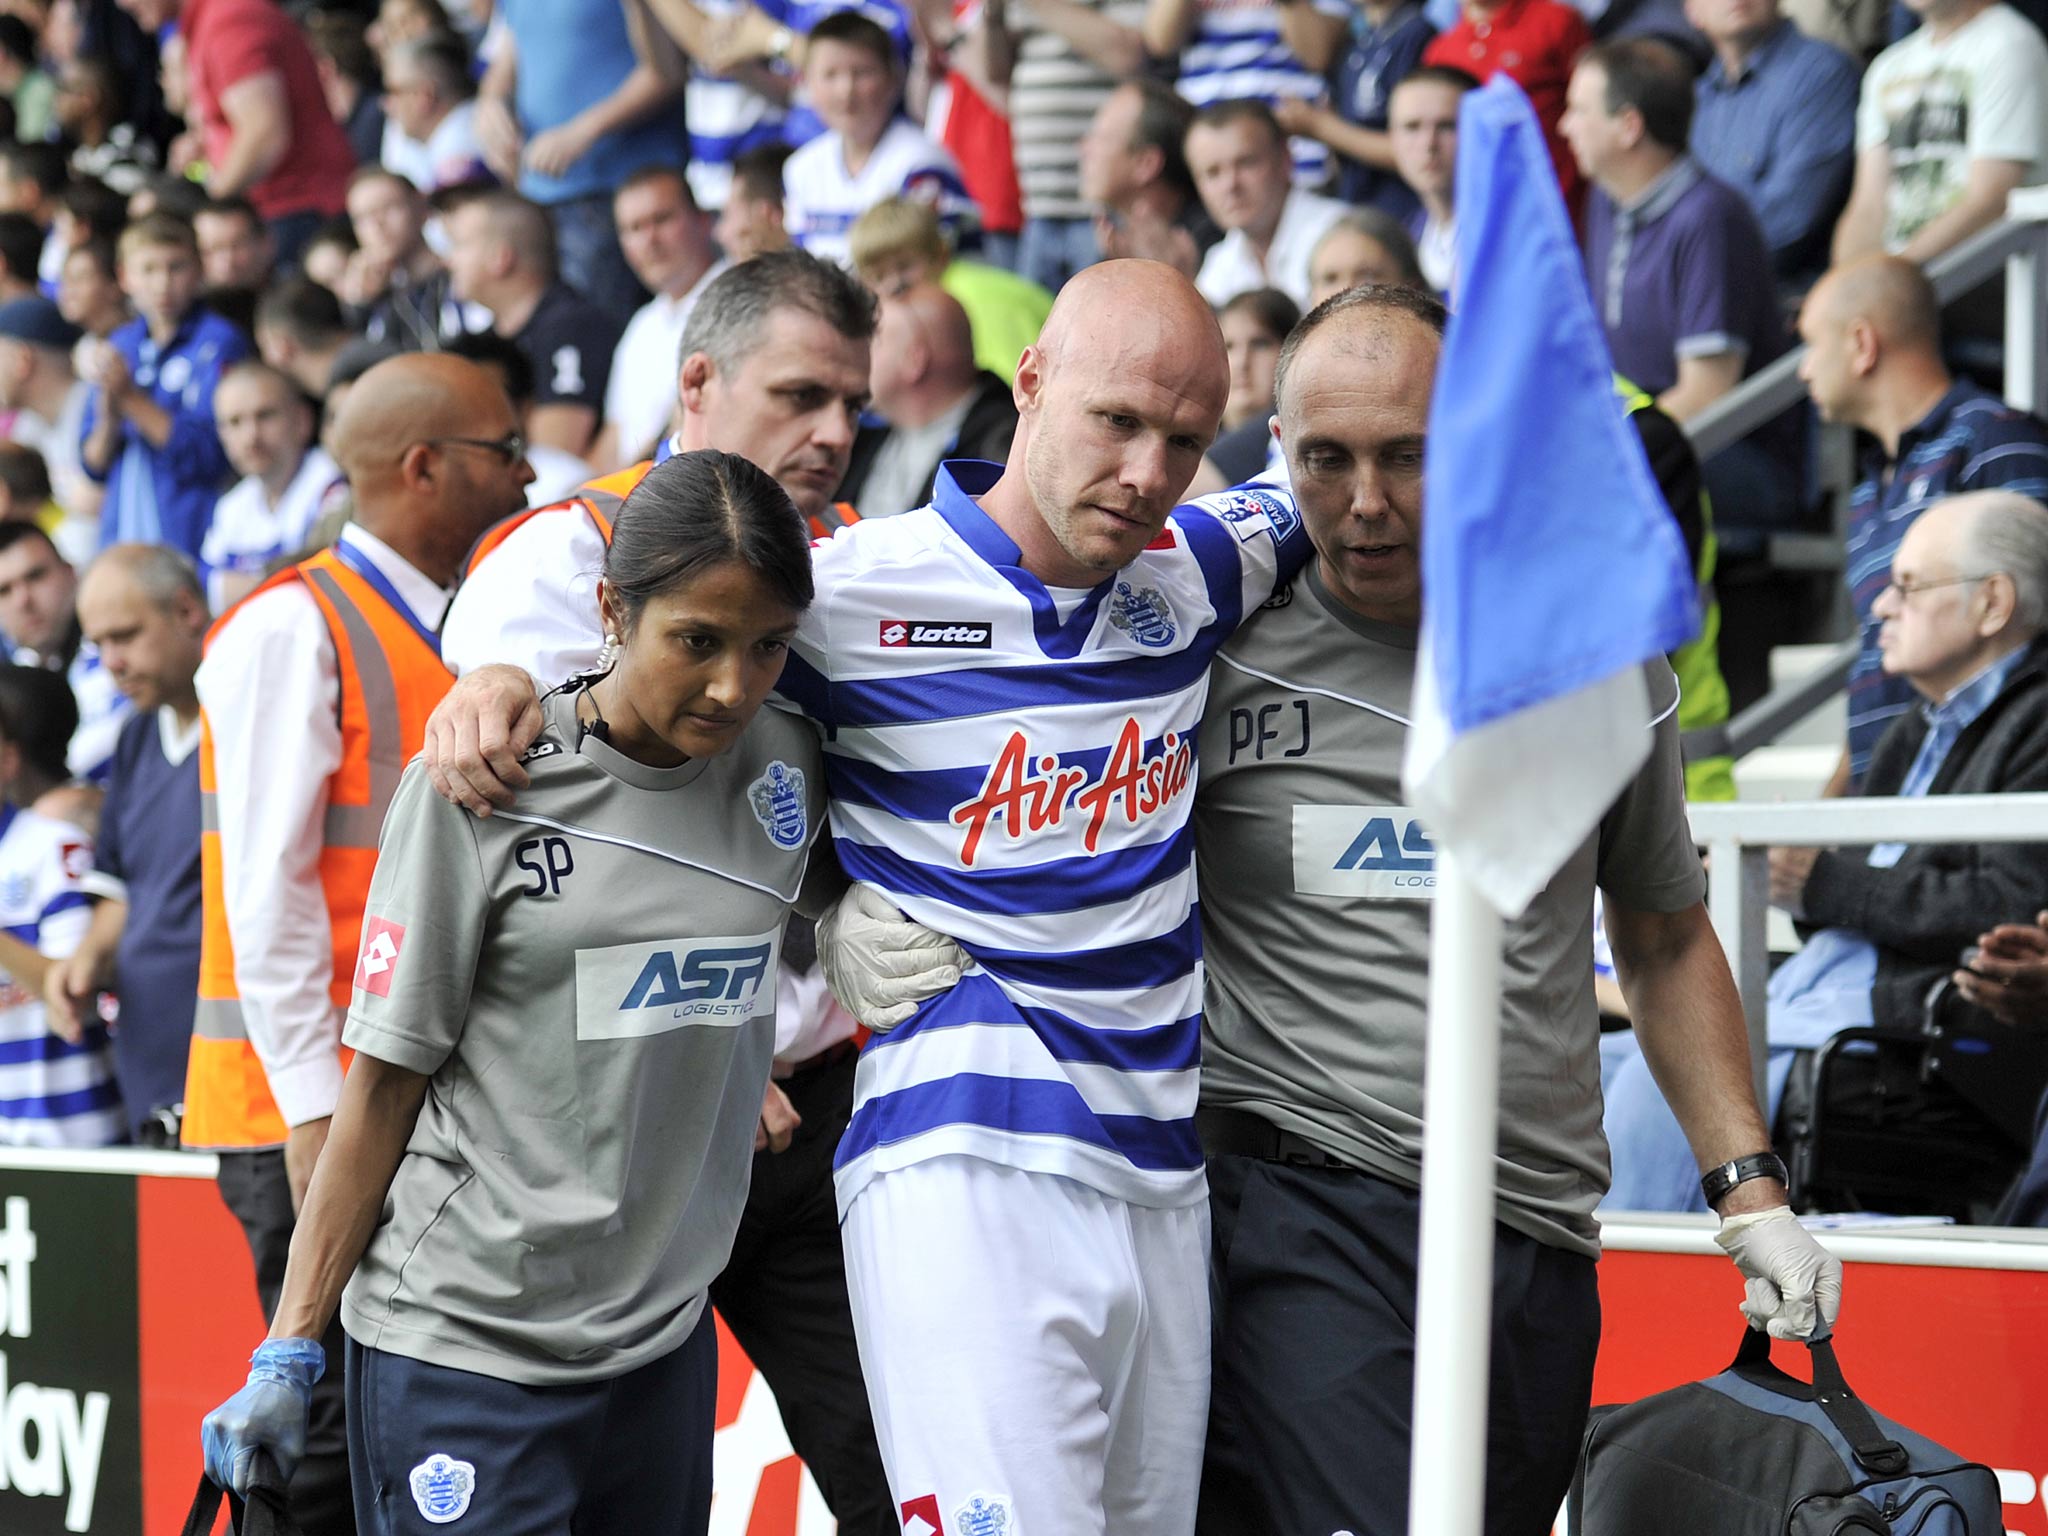 Andy Johnson pictured after sustaining an injury in September 2012